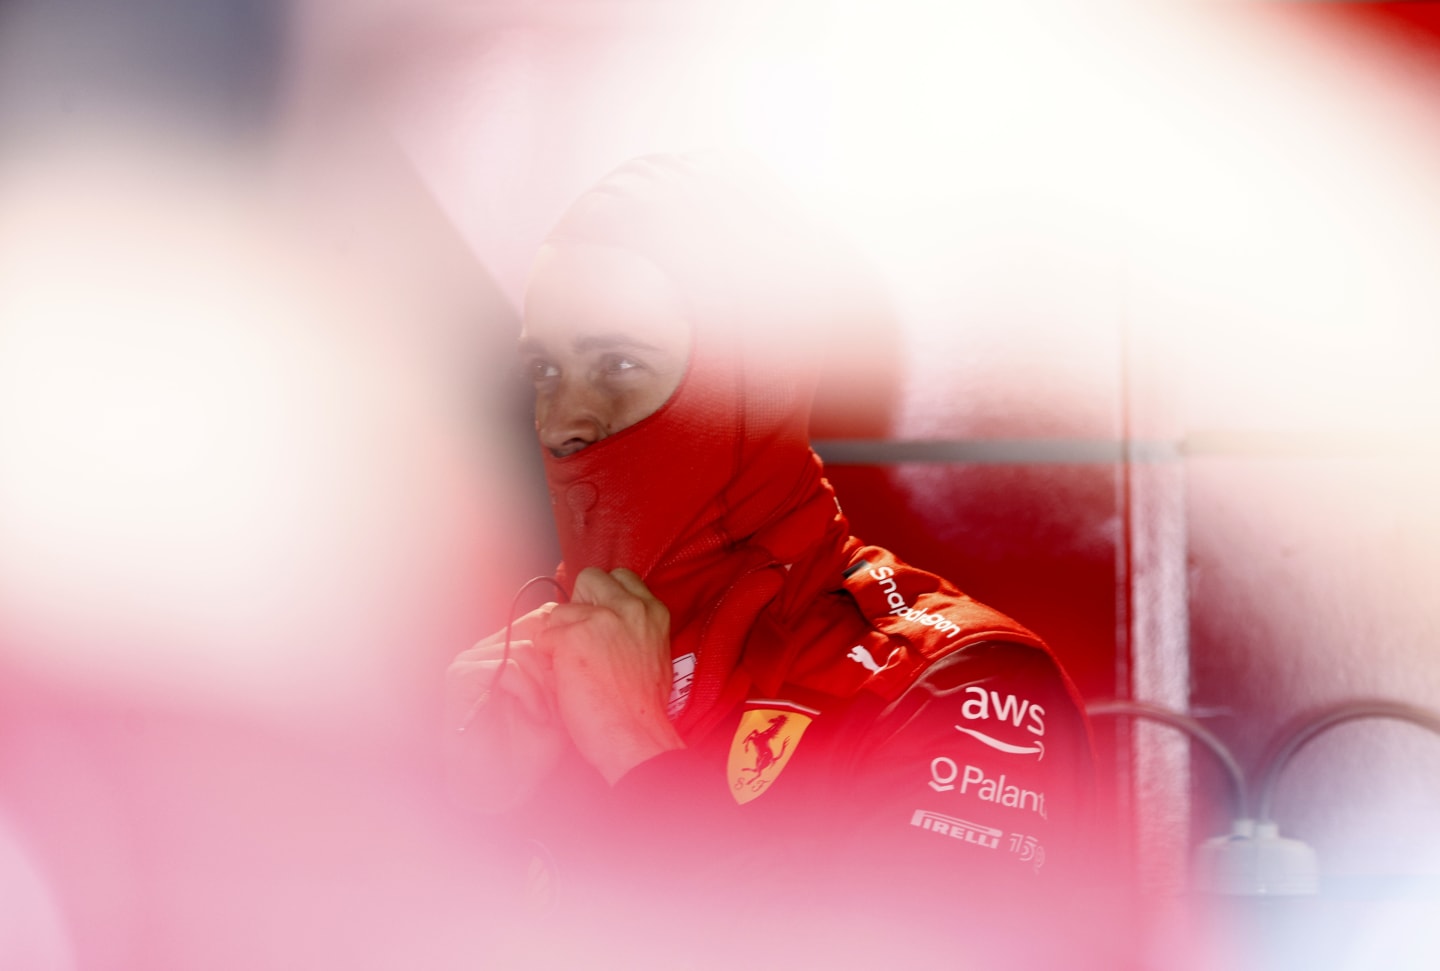 MIAMI, FLORIDA - MAY 06: Charles Leclerc of Monaco and Ferrari prepares to drive in the garage during practice ahead of the F1 Grand Prix of Miami at the Miami International Autodrome on May 06, 2022 in Miami, Florida. (Photo by Jared C. Tilton/Getty Images)